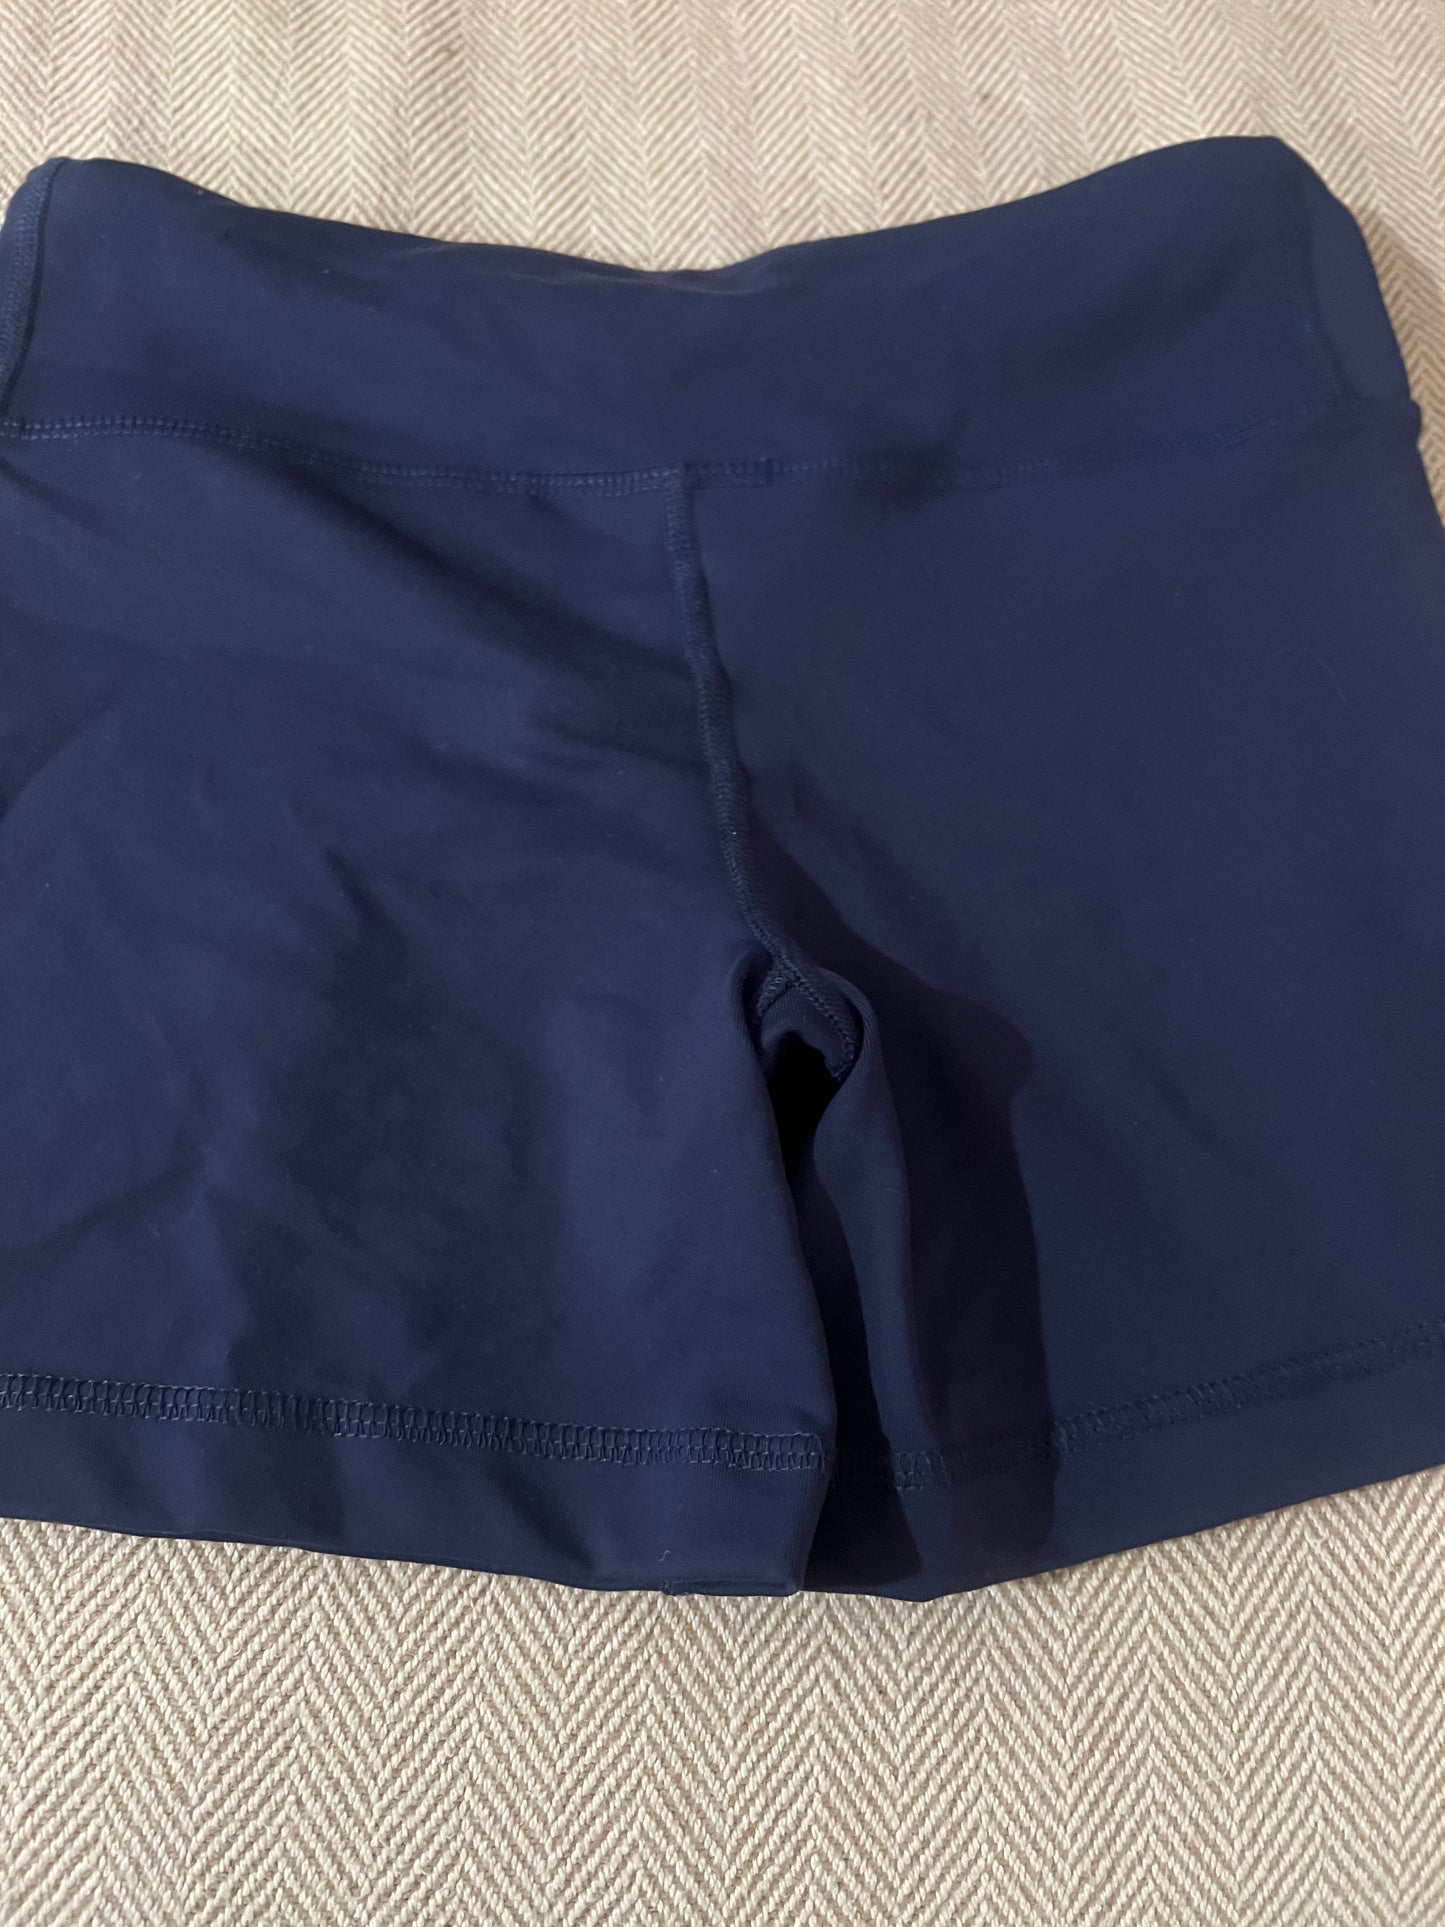 Buns Of Steen® Mid Thigh Shorts